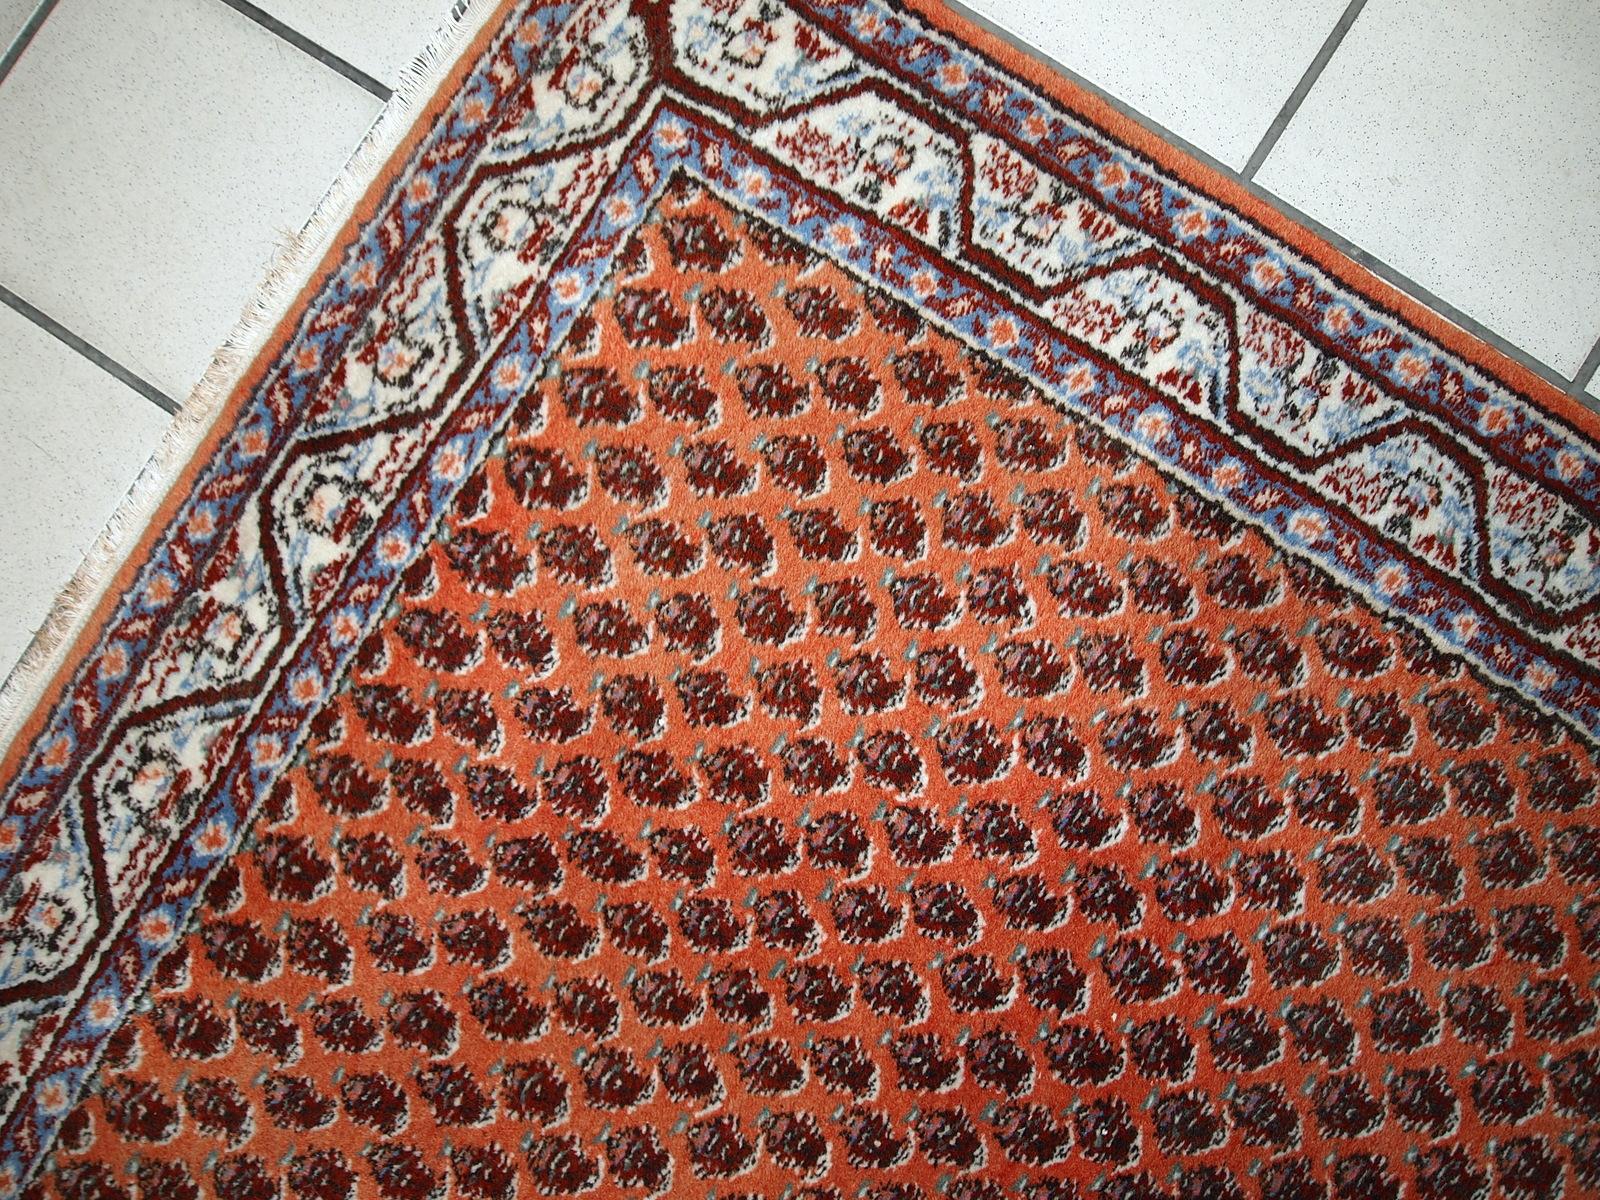 Handmade vintage Uzbek Bukhara rug in original good condition. The rug made in soft wool in the middle of 20th century. 

-condition: original good,

-circa: 1960s,

-size: 3.9' x 5.8' (121cm x 177cm),

-material: wool,

-country of origin: